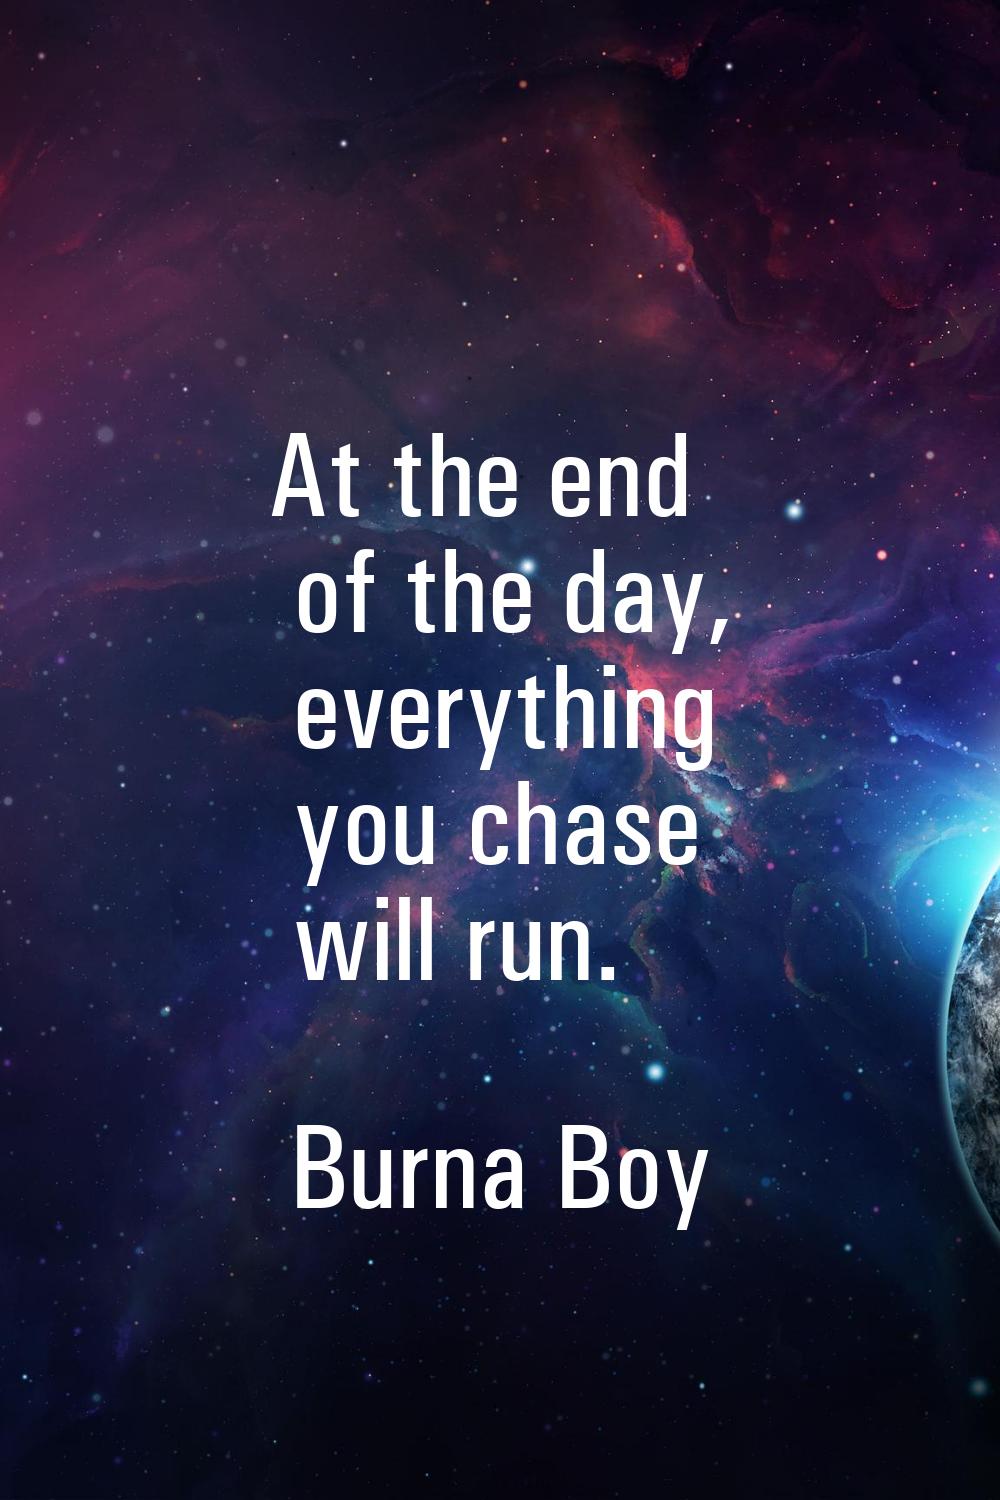 At the end of the day, everything you chase will run.